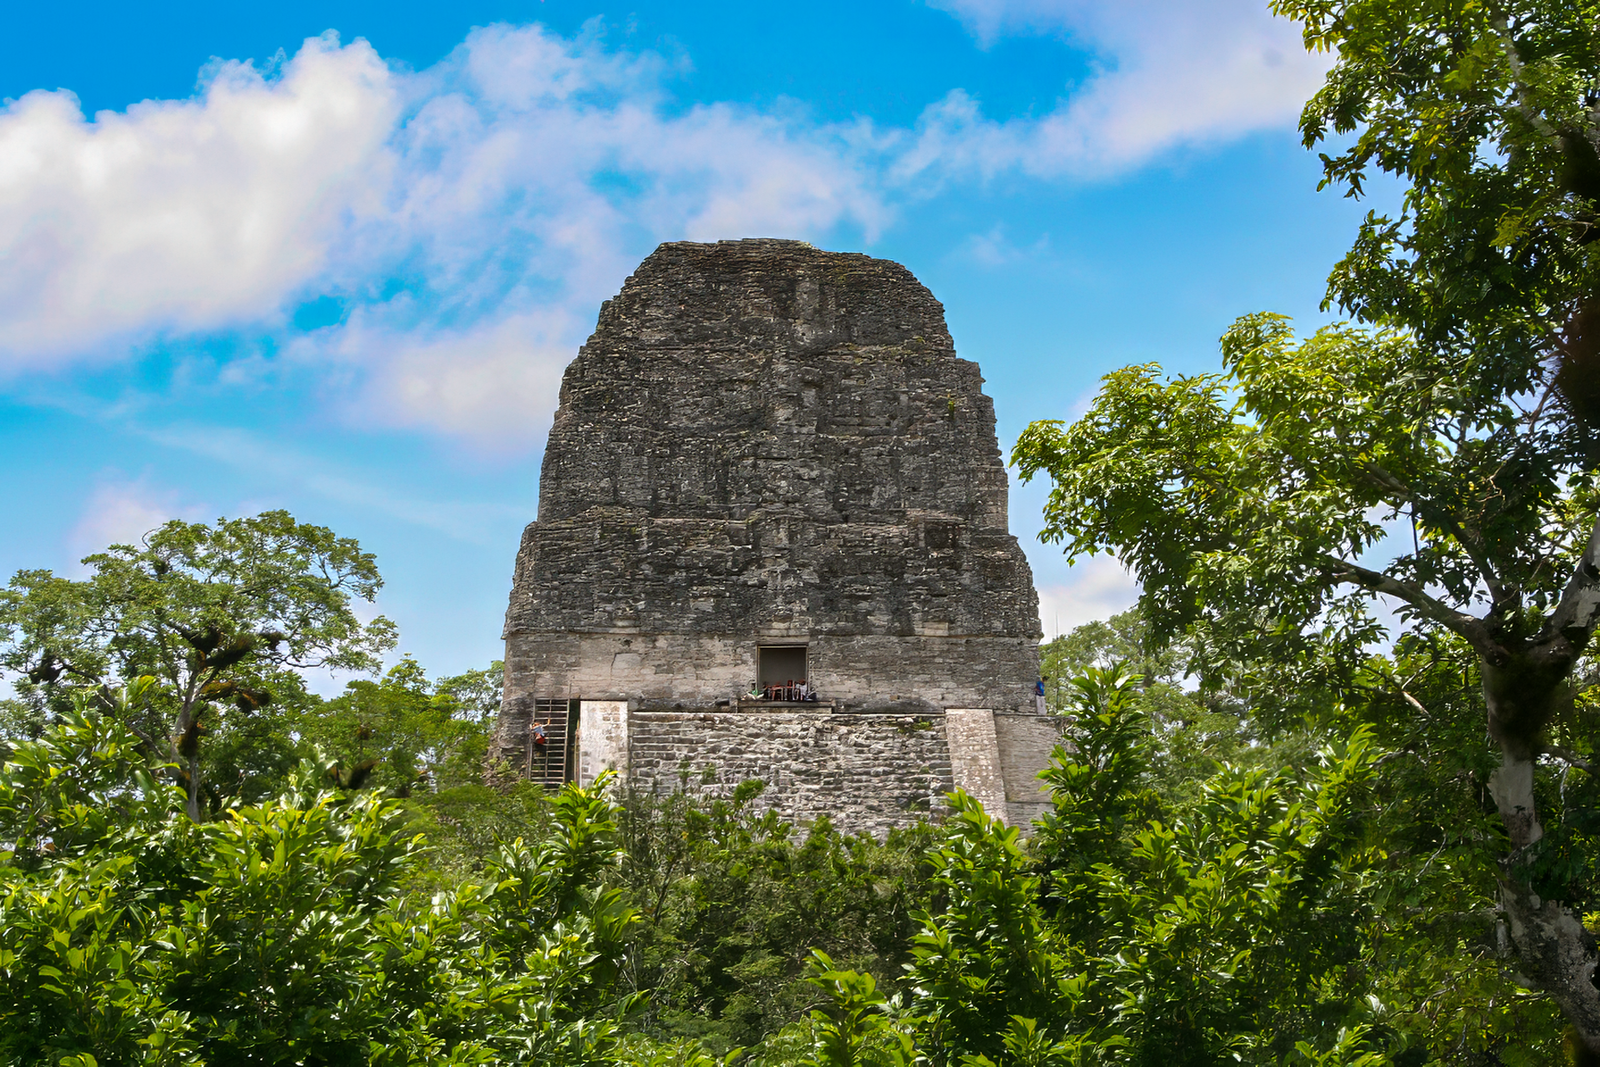 Frontal view of the top of Temple 5 in Tikal, showcasing its intricate ancient Maya architectural details and grandeur, set against a clear sky – a majestic representation of the Temples of Tikal.